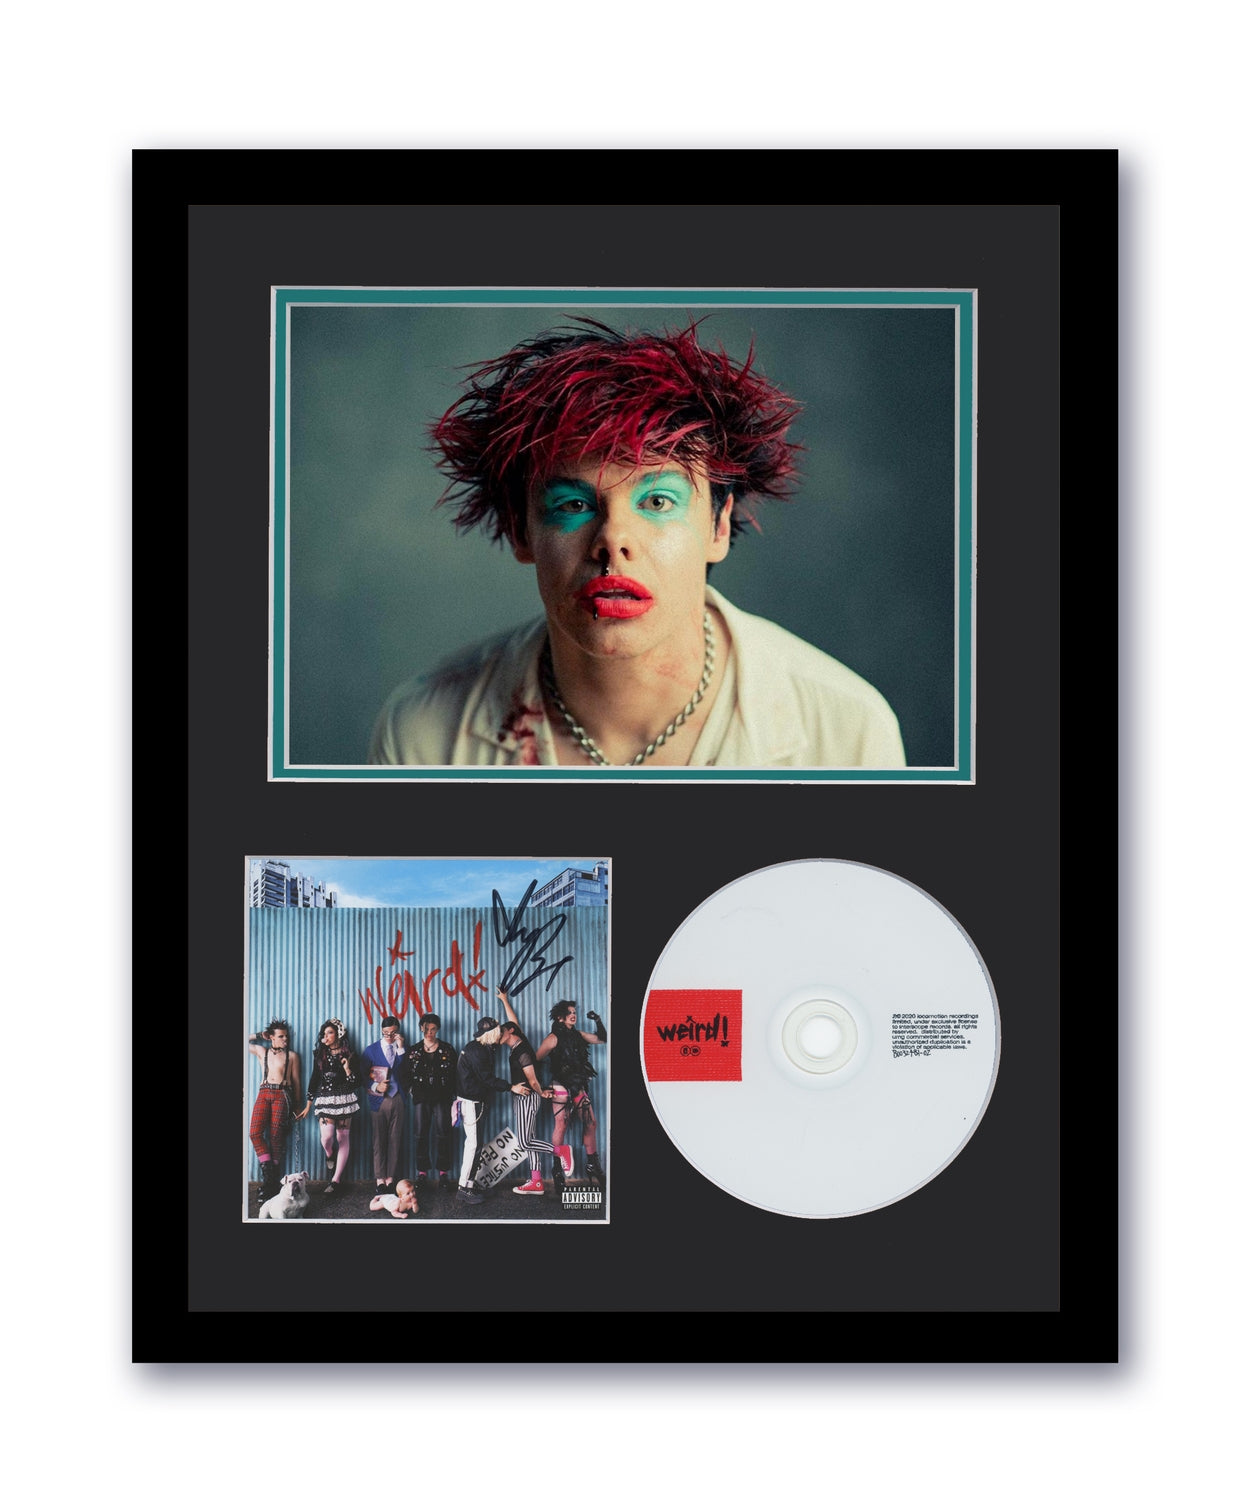 Yungblud Autographed Signed 11x14 Framed CD Photo Weird! ACOA 5